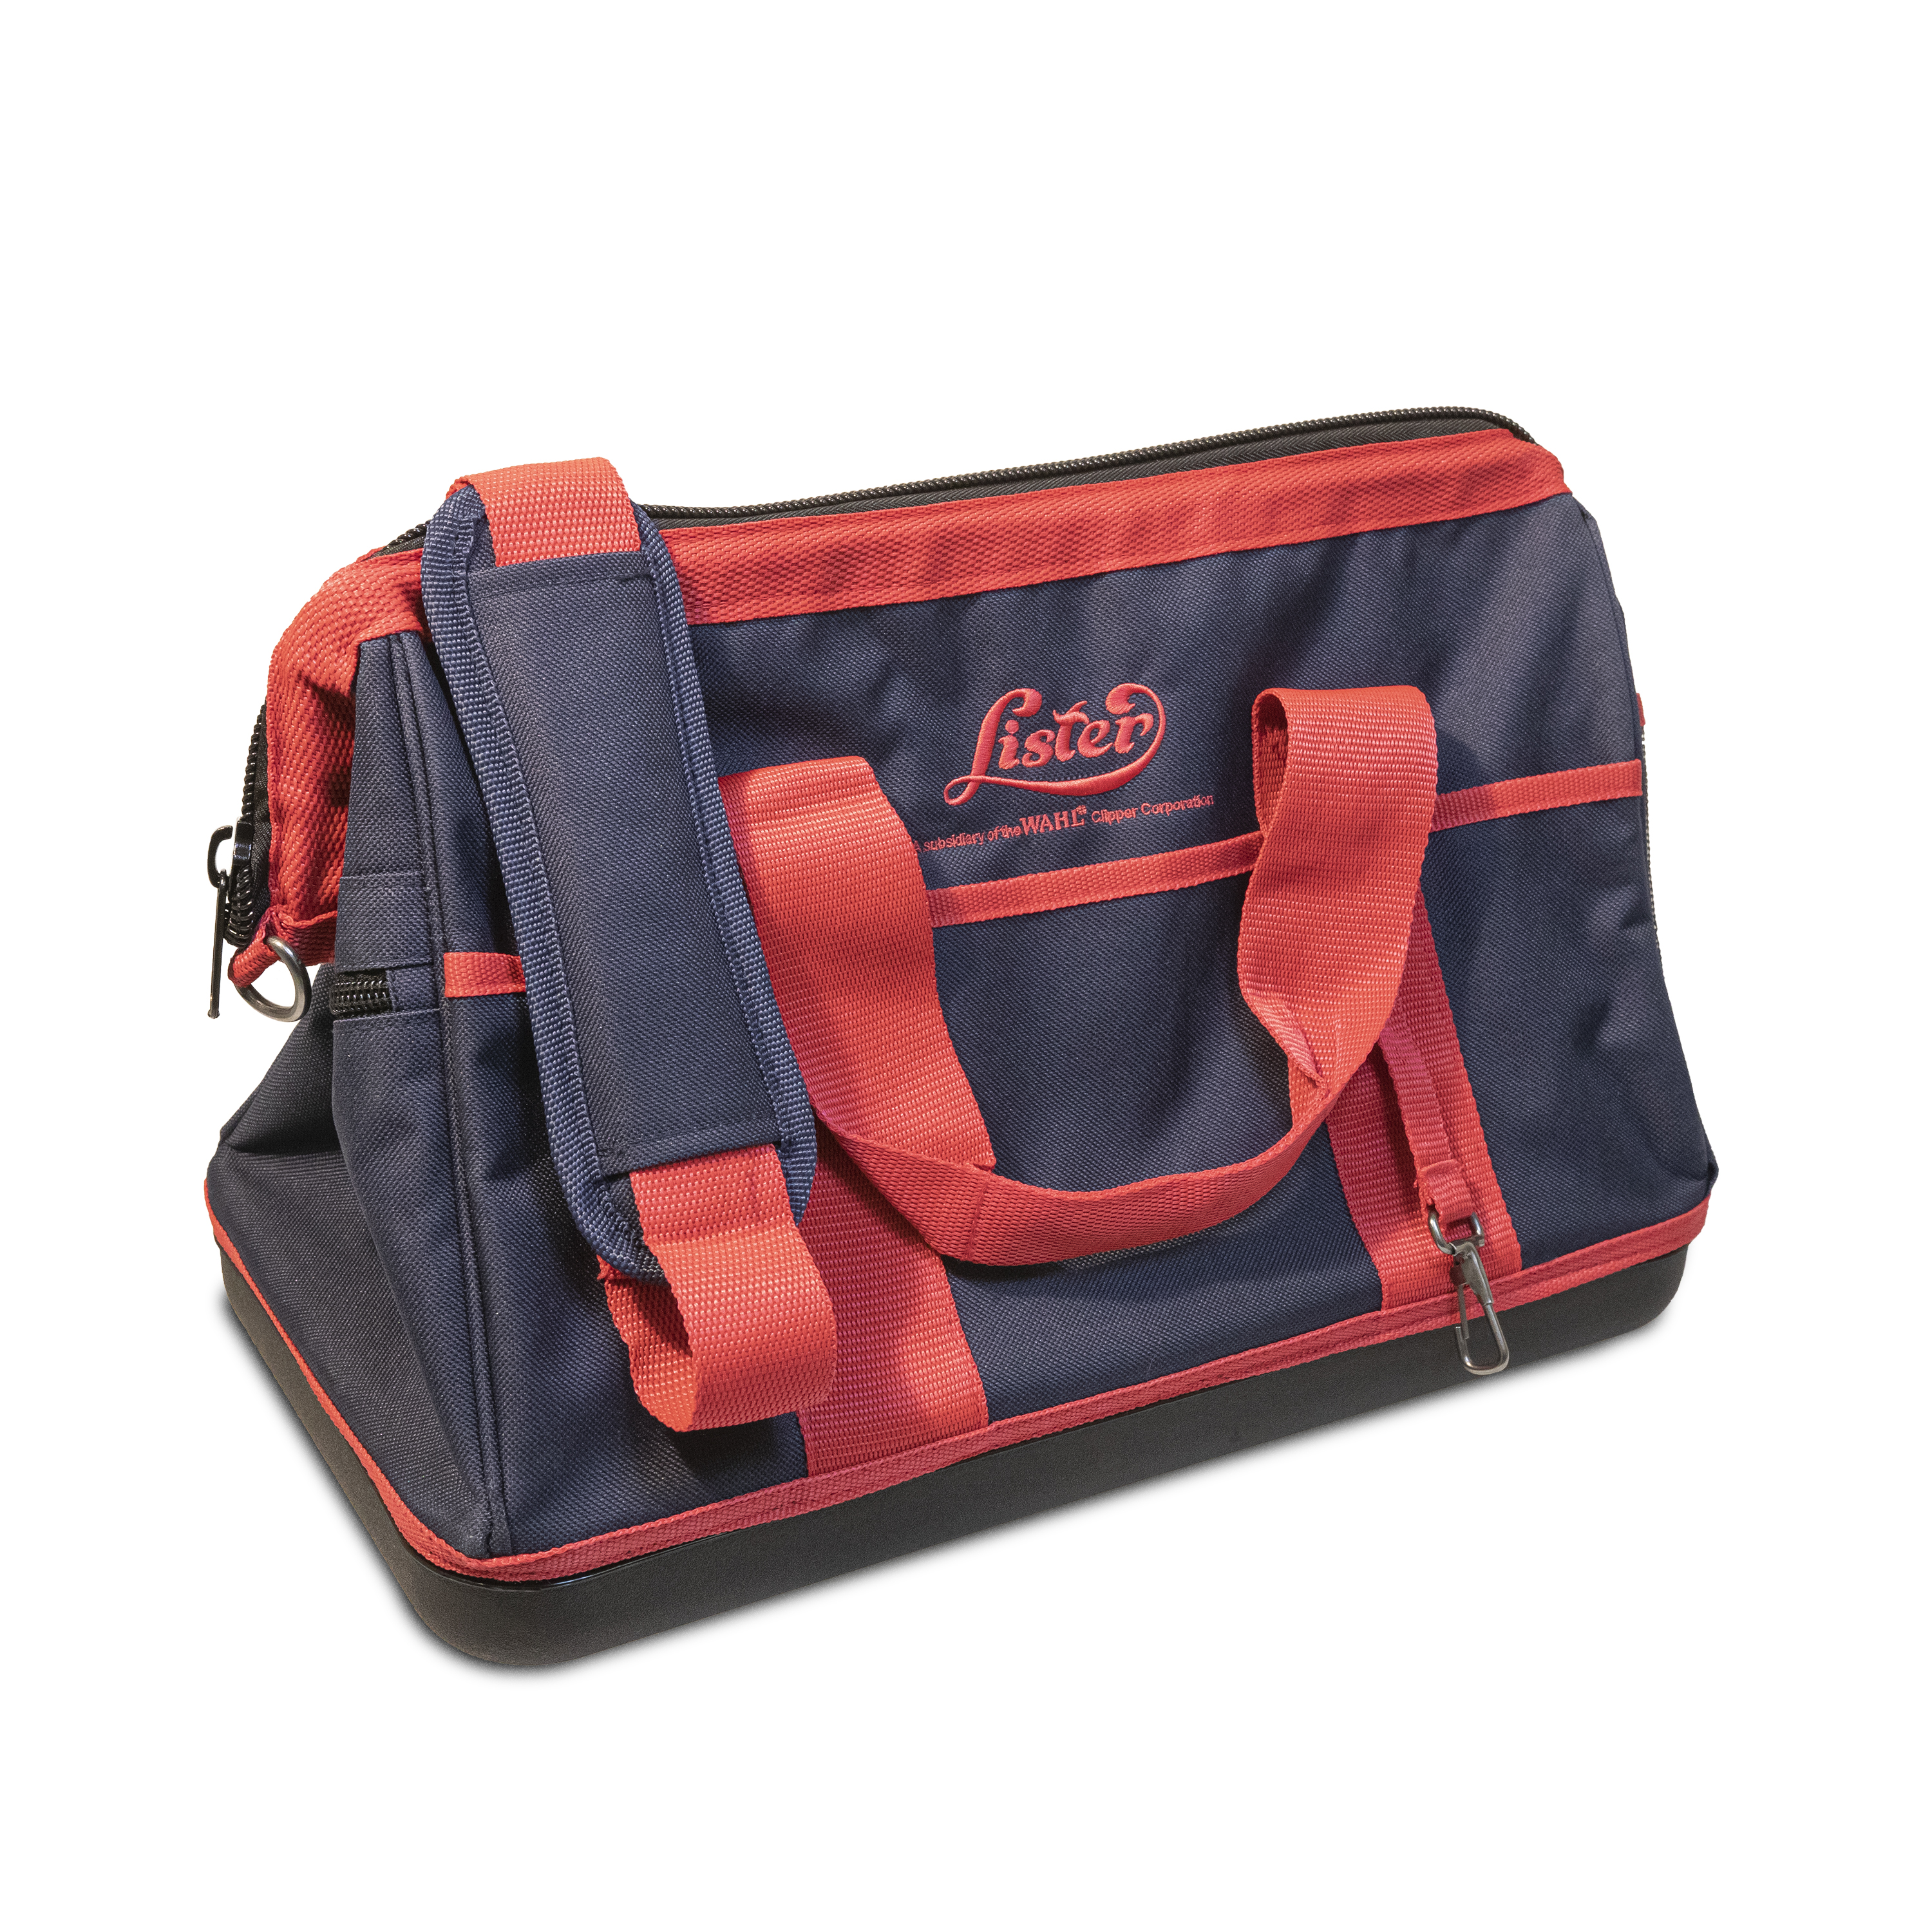 Red and Navy clipper holdall, Lister Shearing